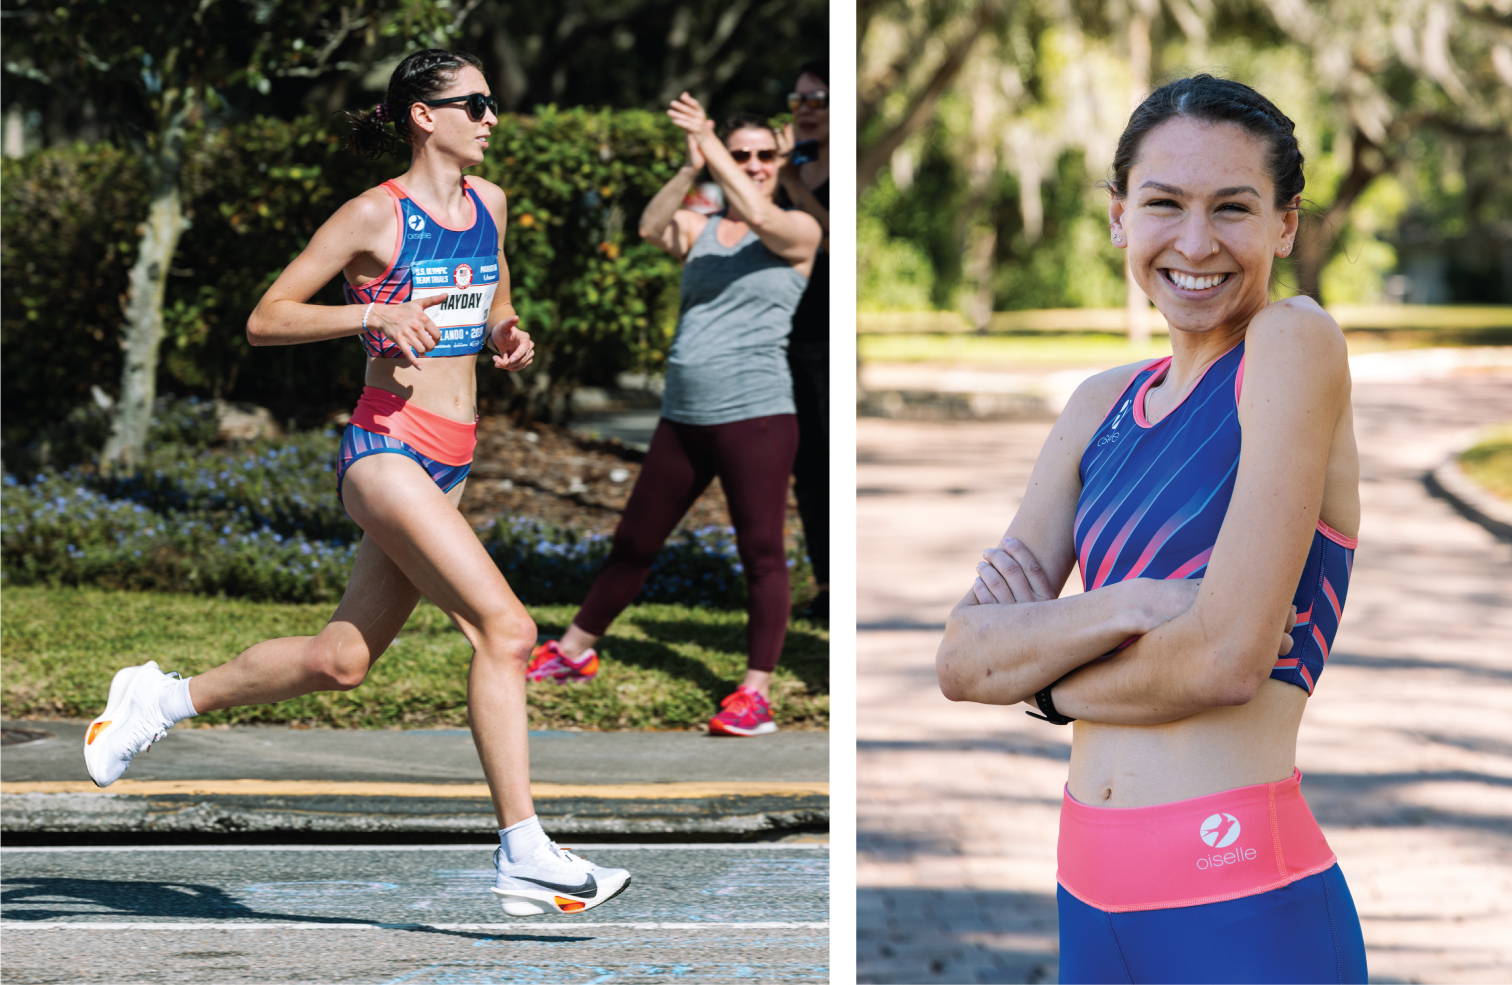 Left: Elena Hayday racing the Olympic Marathon Trials. Right: portrait of Elena smiling in her Oiselle uniform